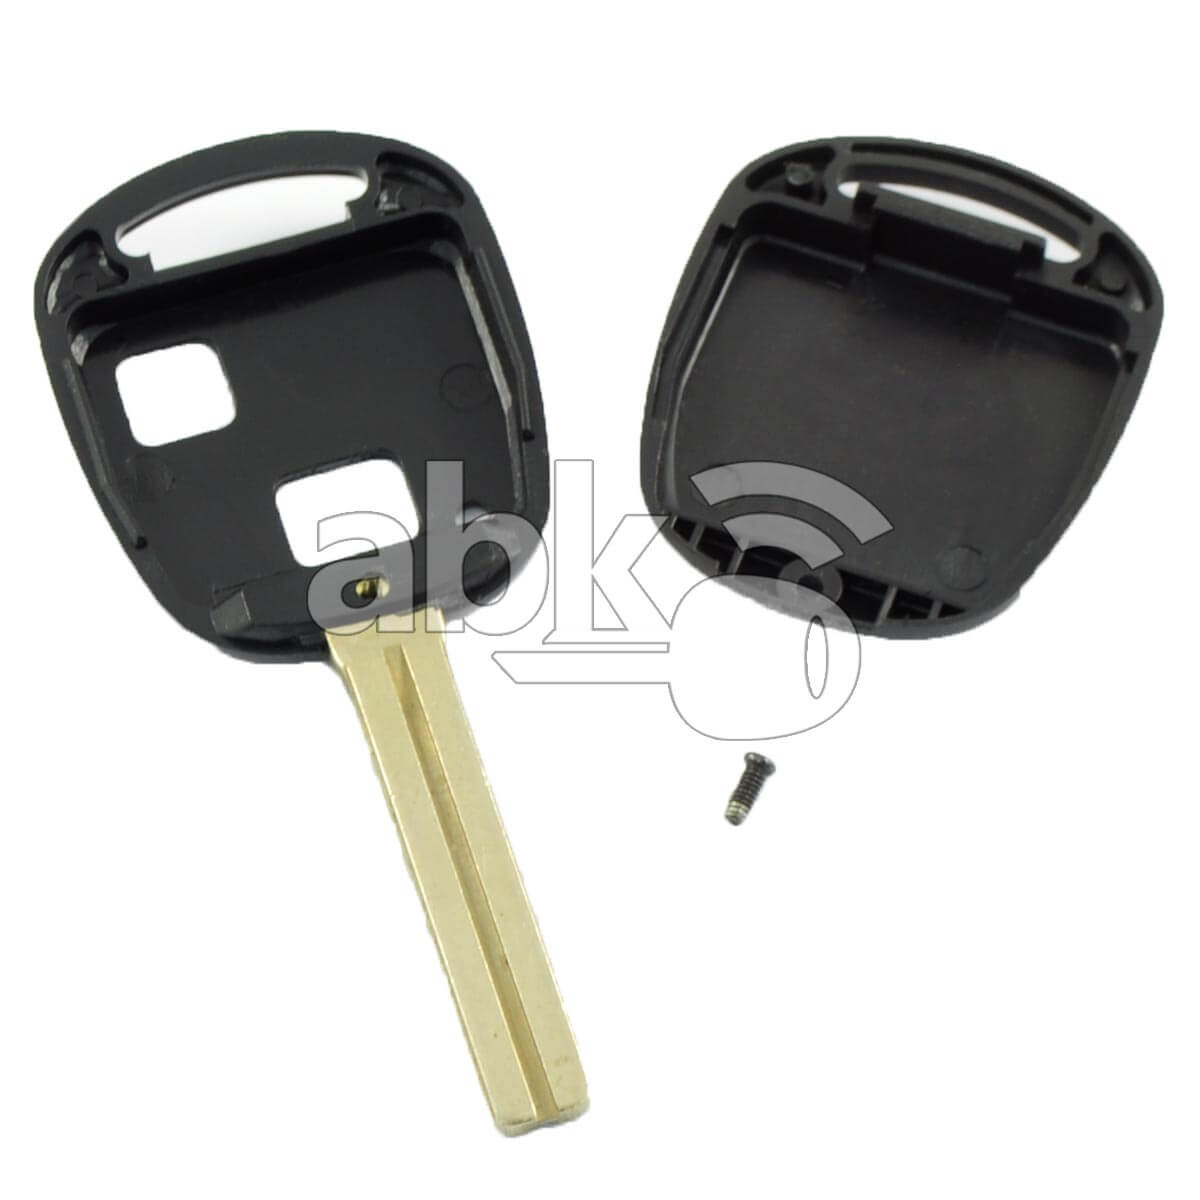 Toyota 1998+ Key Head Remote Cover 2Buttons TOY48 - ABK-178 - ABKEYS.COM